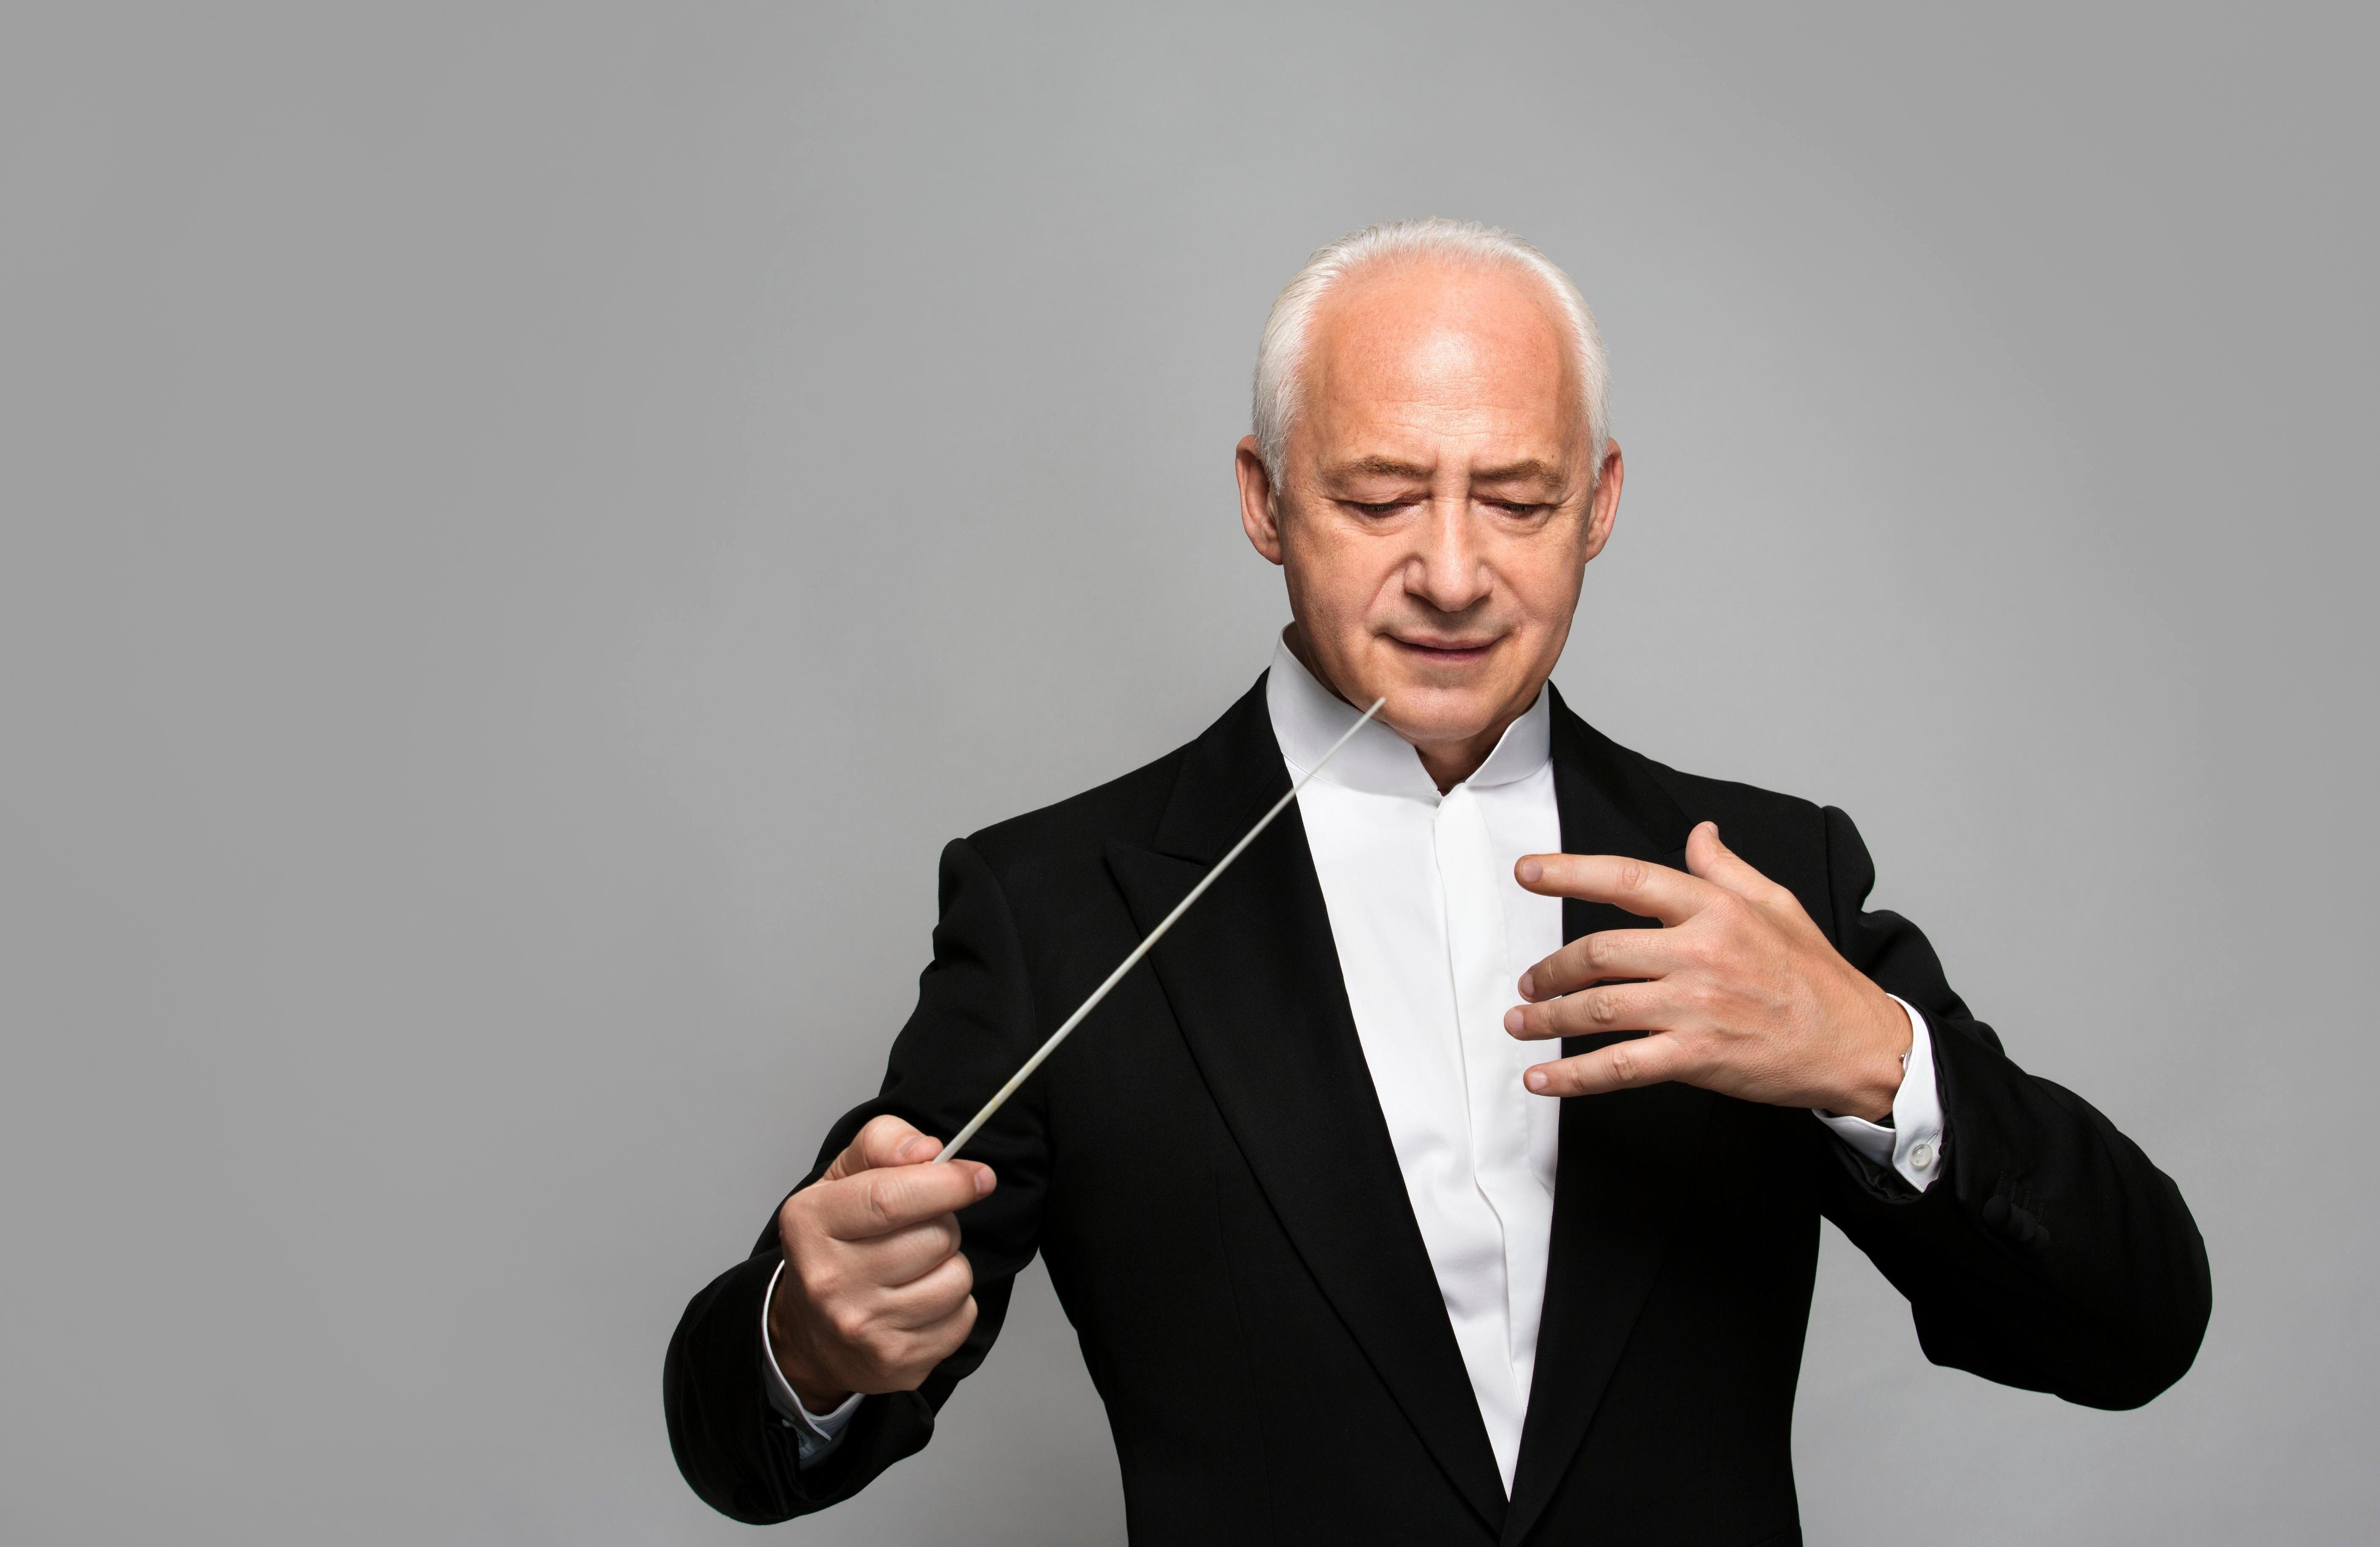 The National Philharmonic Orchestra of Russia Conductor – Vladimir Spivakov